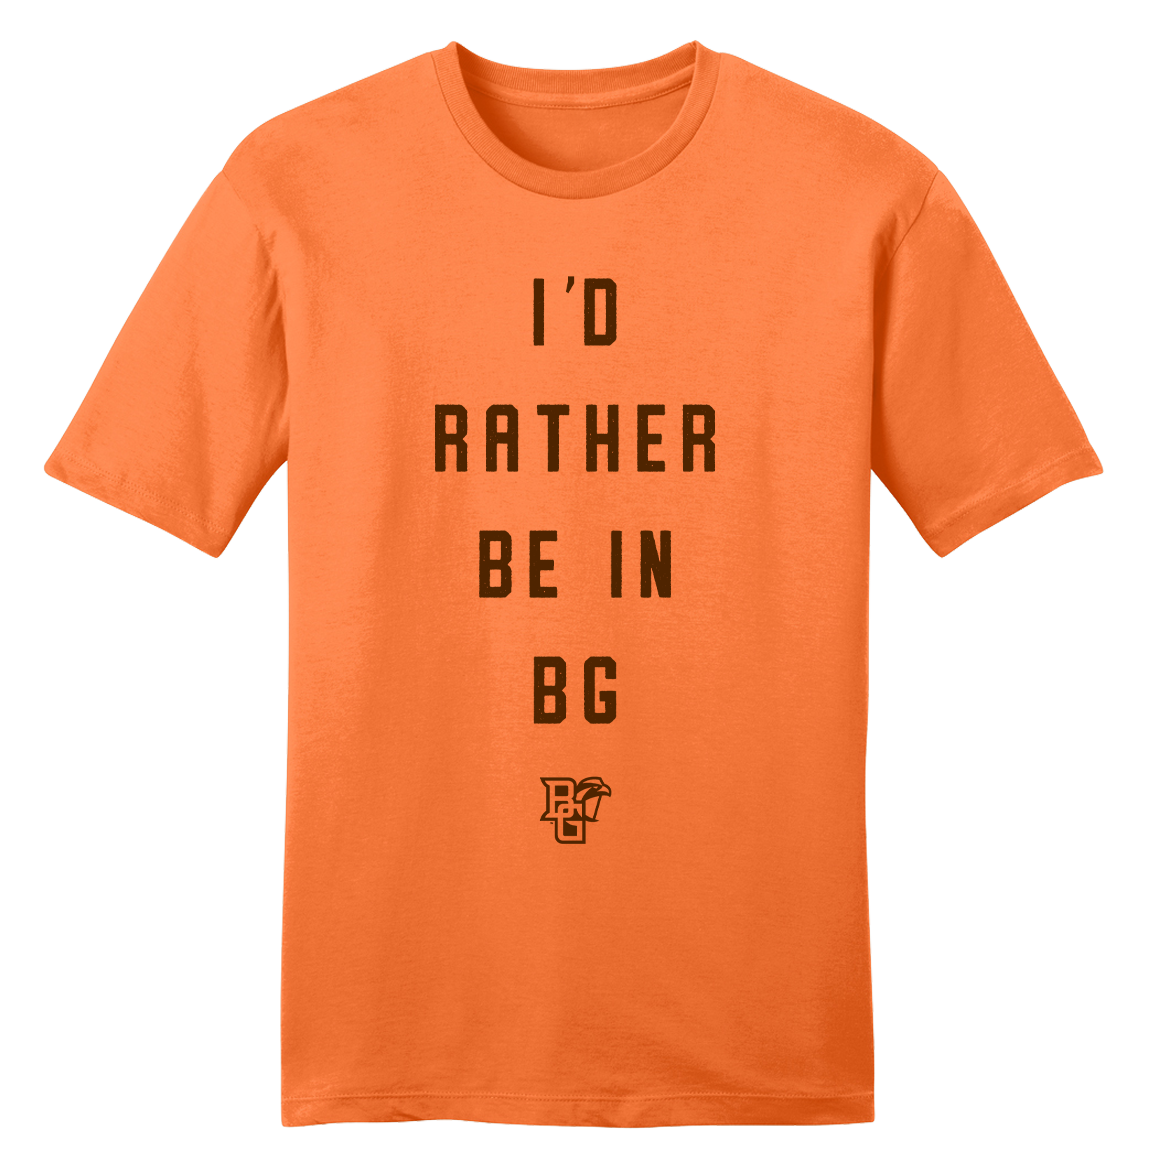 I'd Rather Be In BG - Cincy Shirts